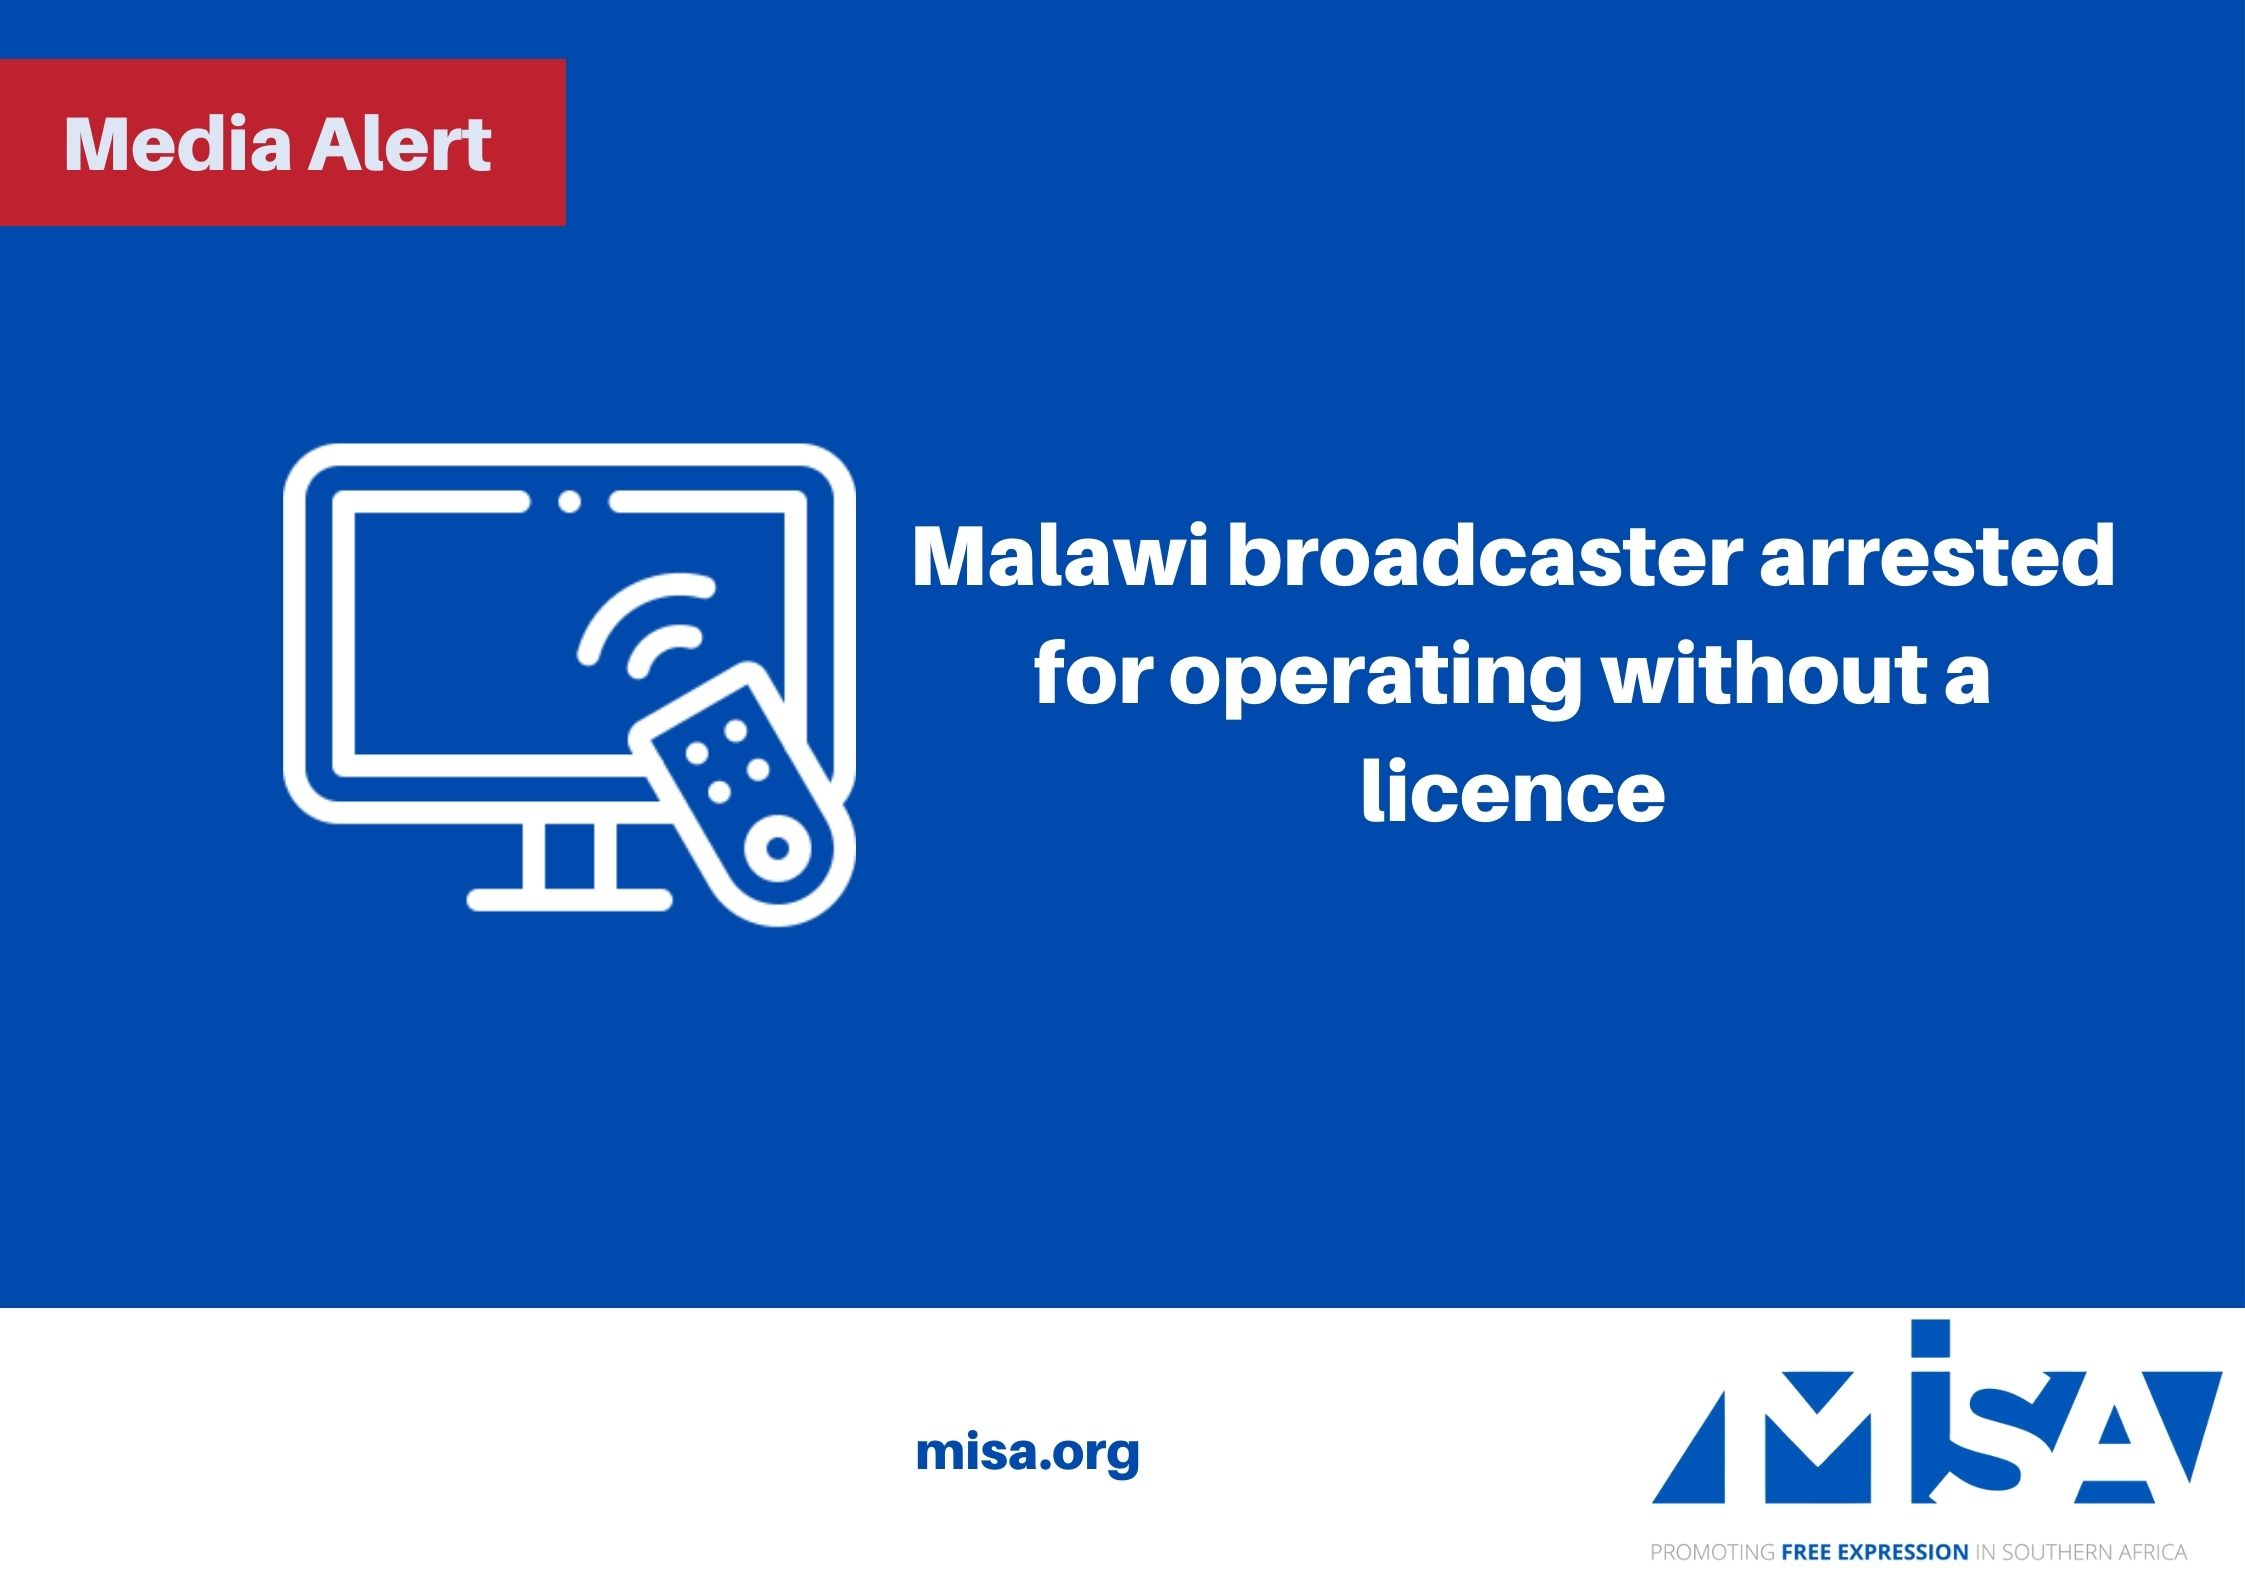 Malawi broadcaster arrested for operating without a licence